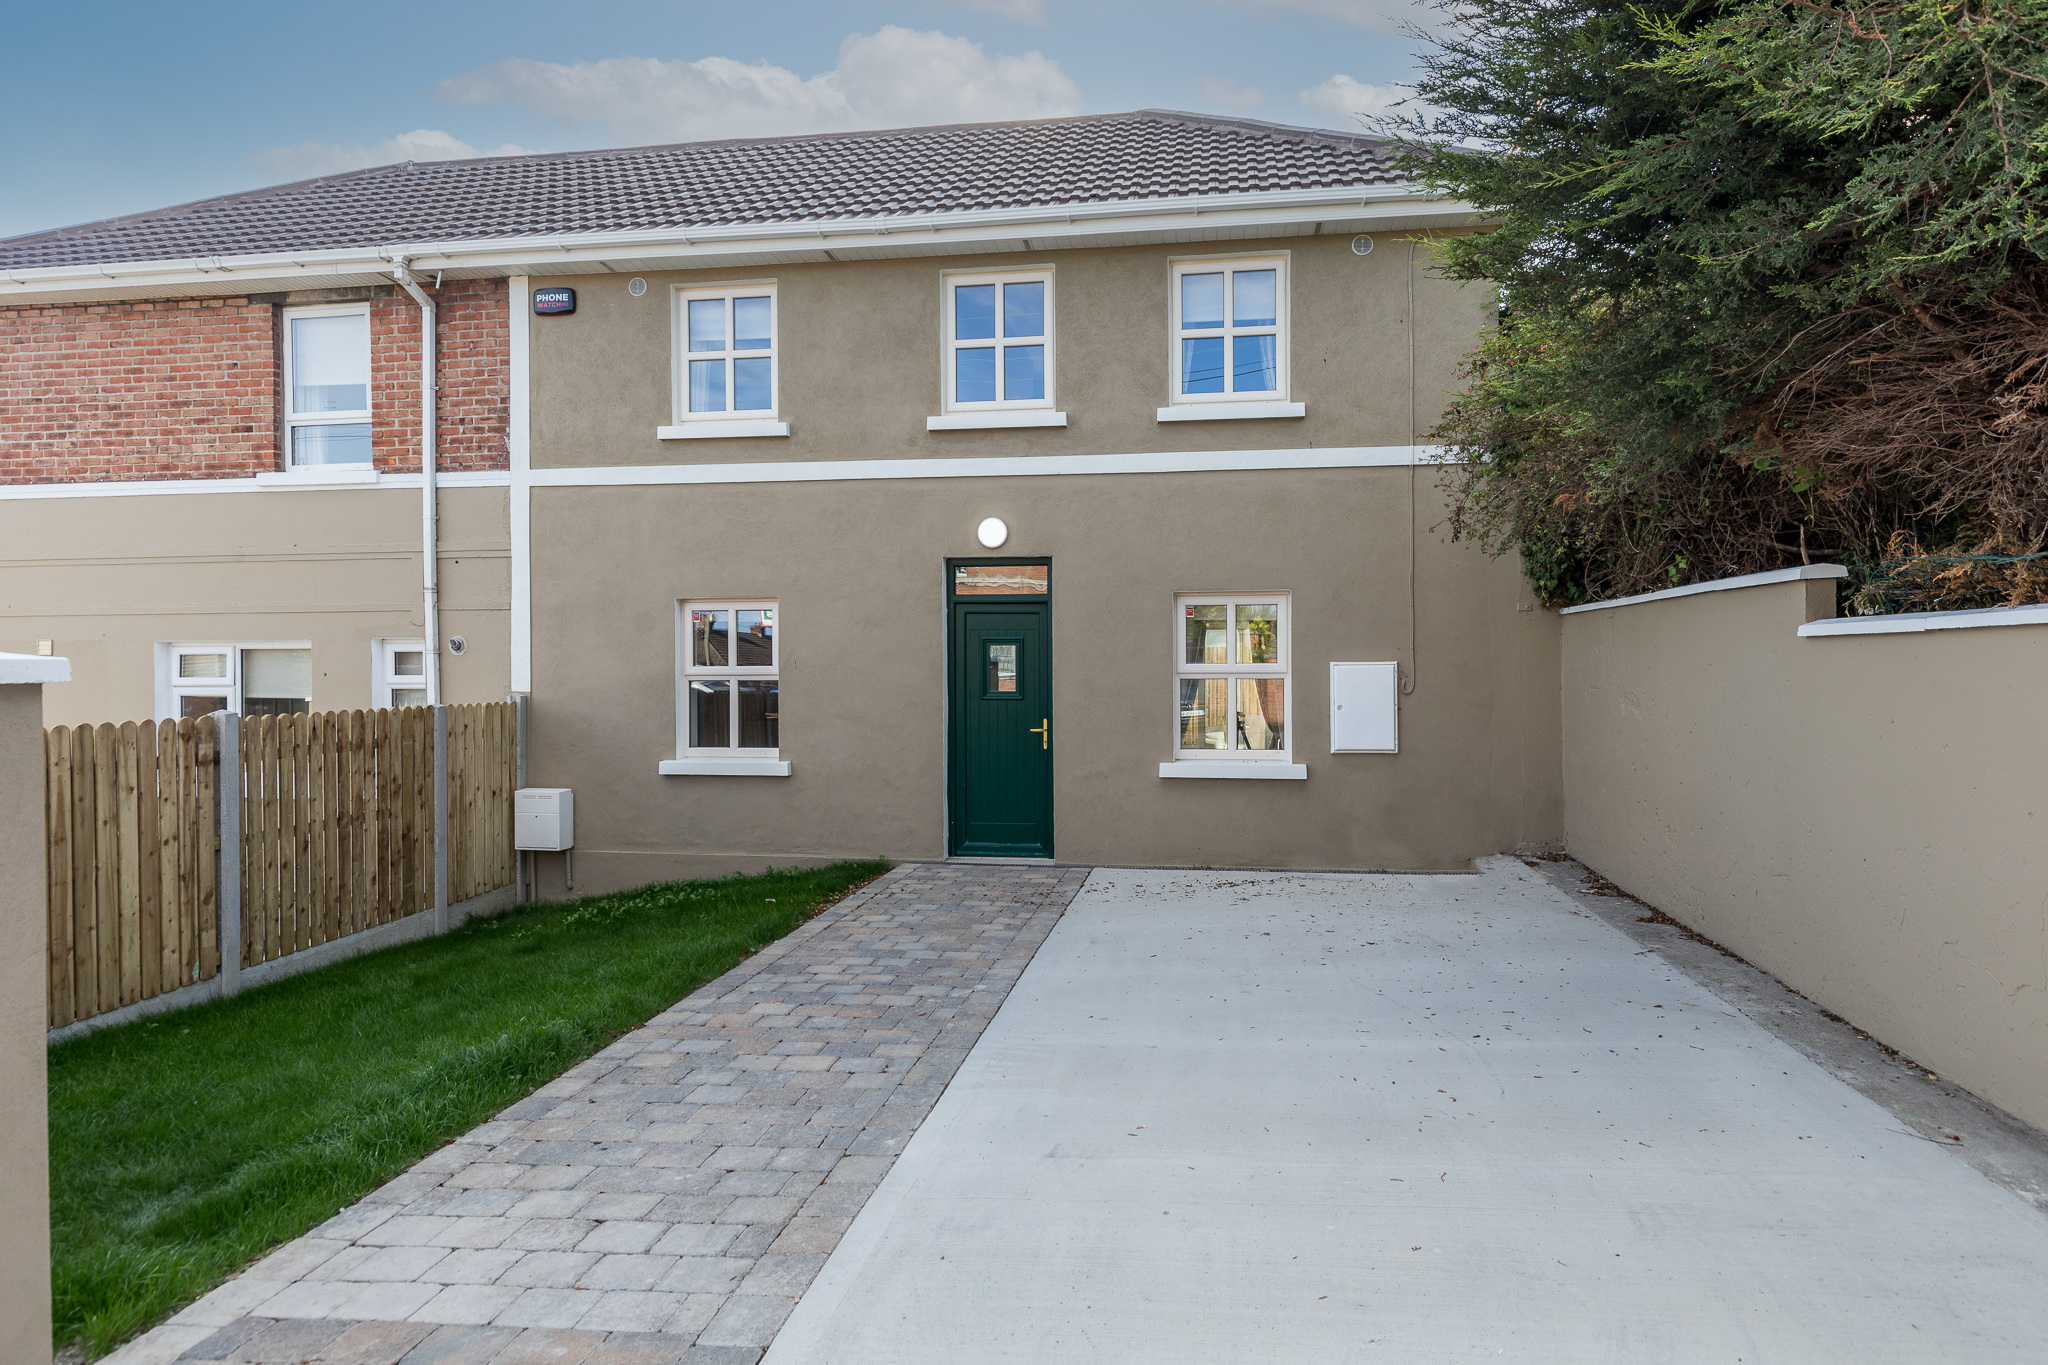 59B Pearse Park Drogheda Co Louth